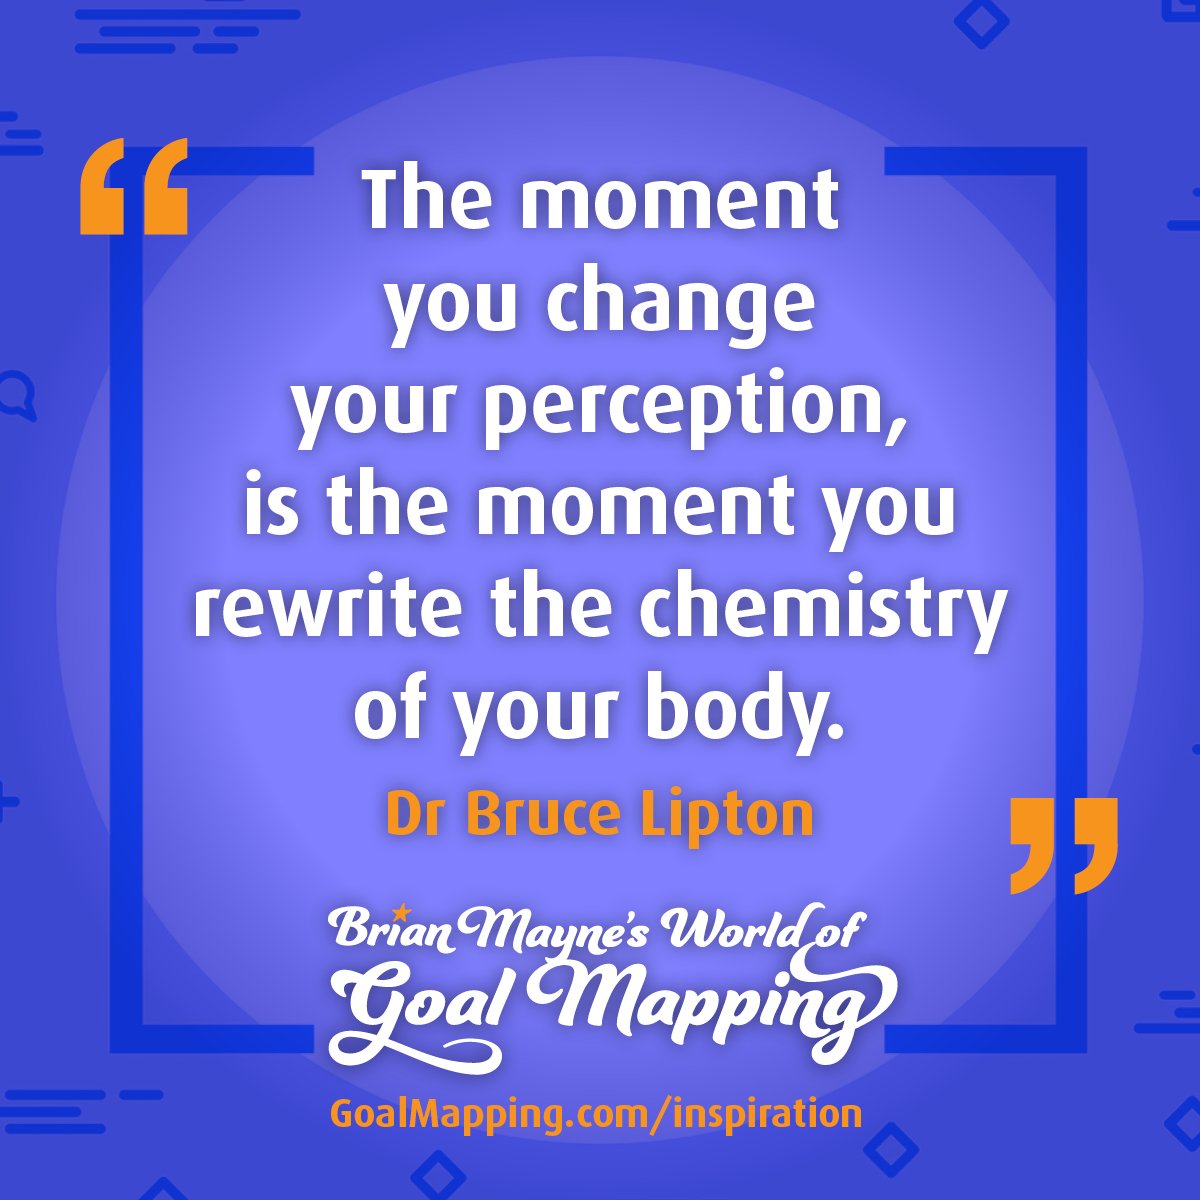 "The moment you change your perception, is the moment you rewrite the chemistry of your body." Dr Bruce Lipton